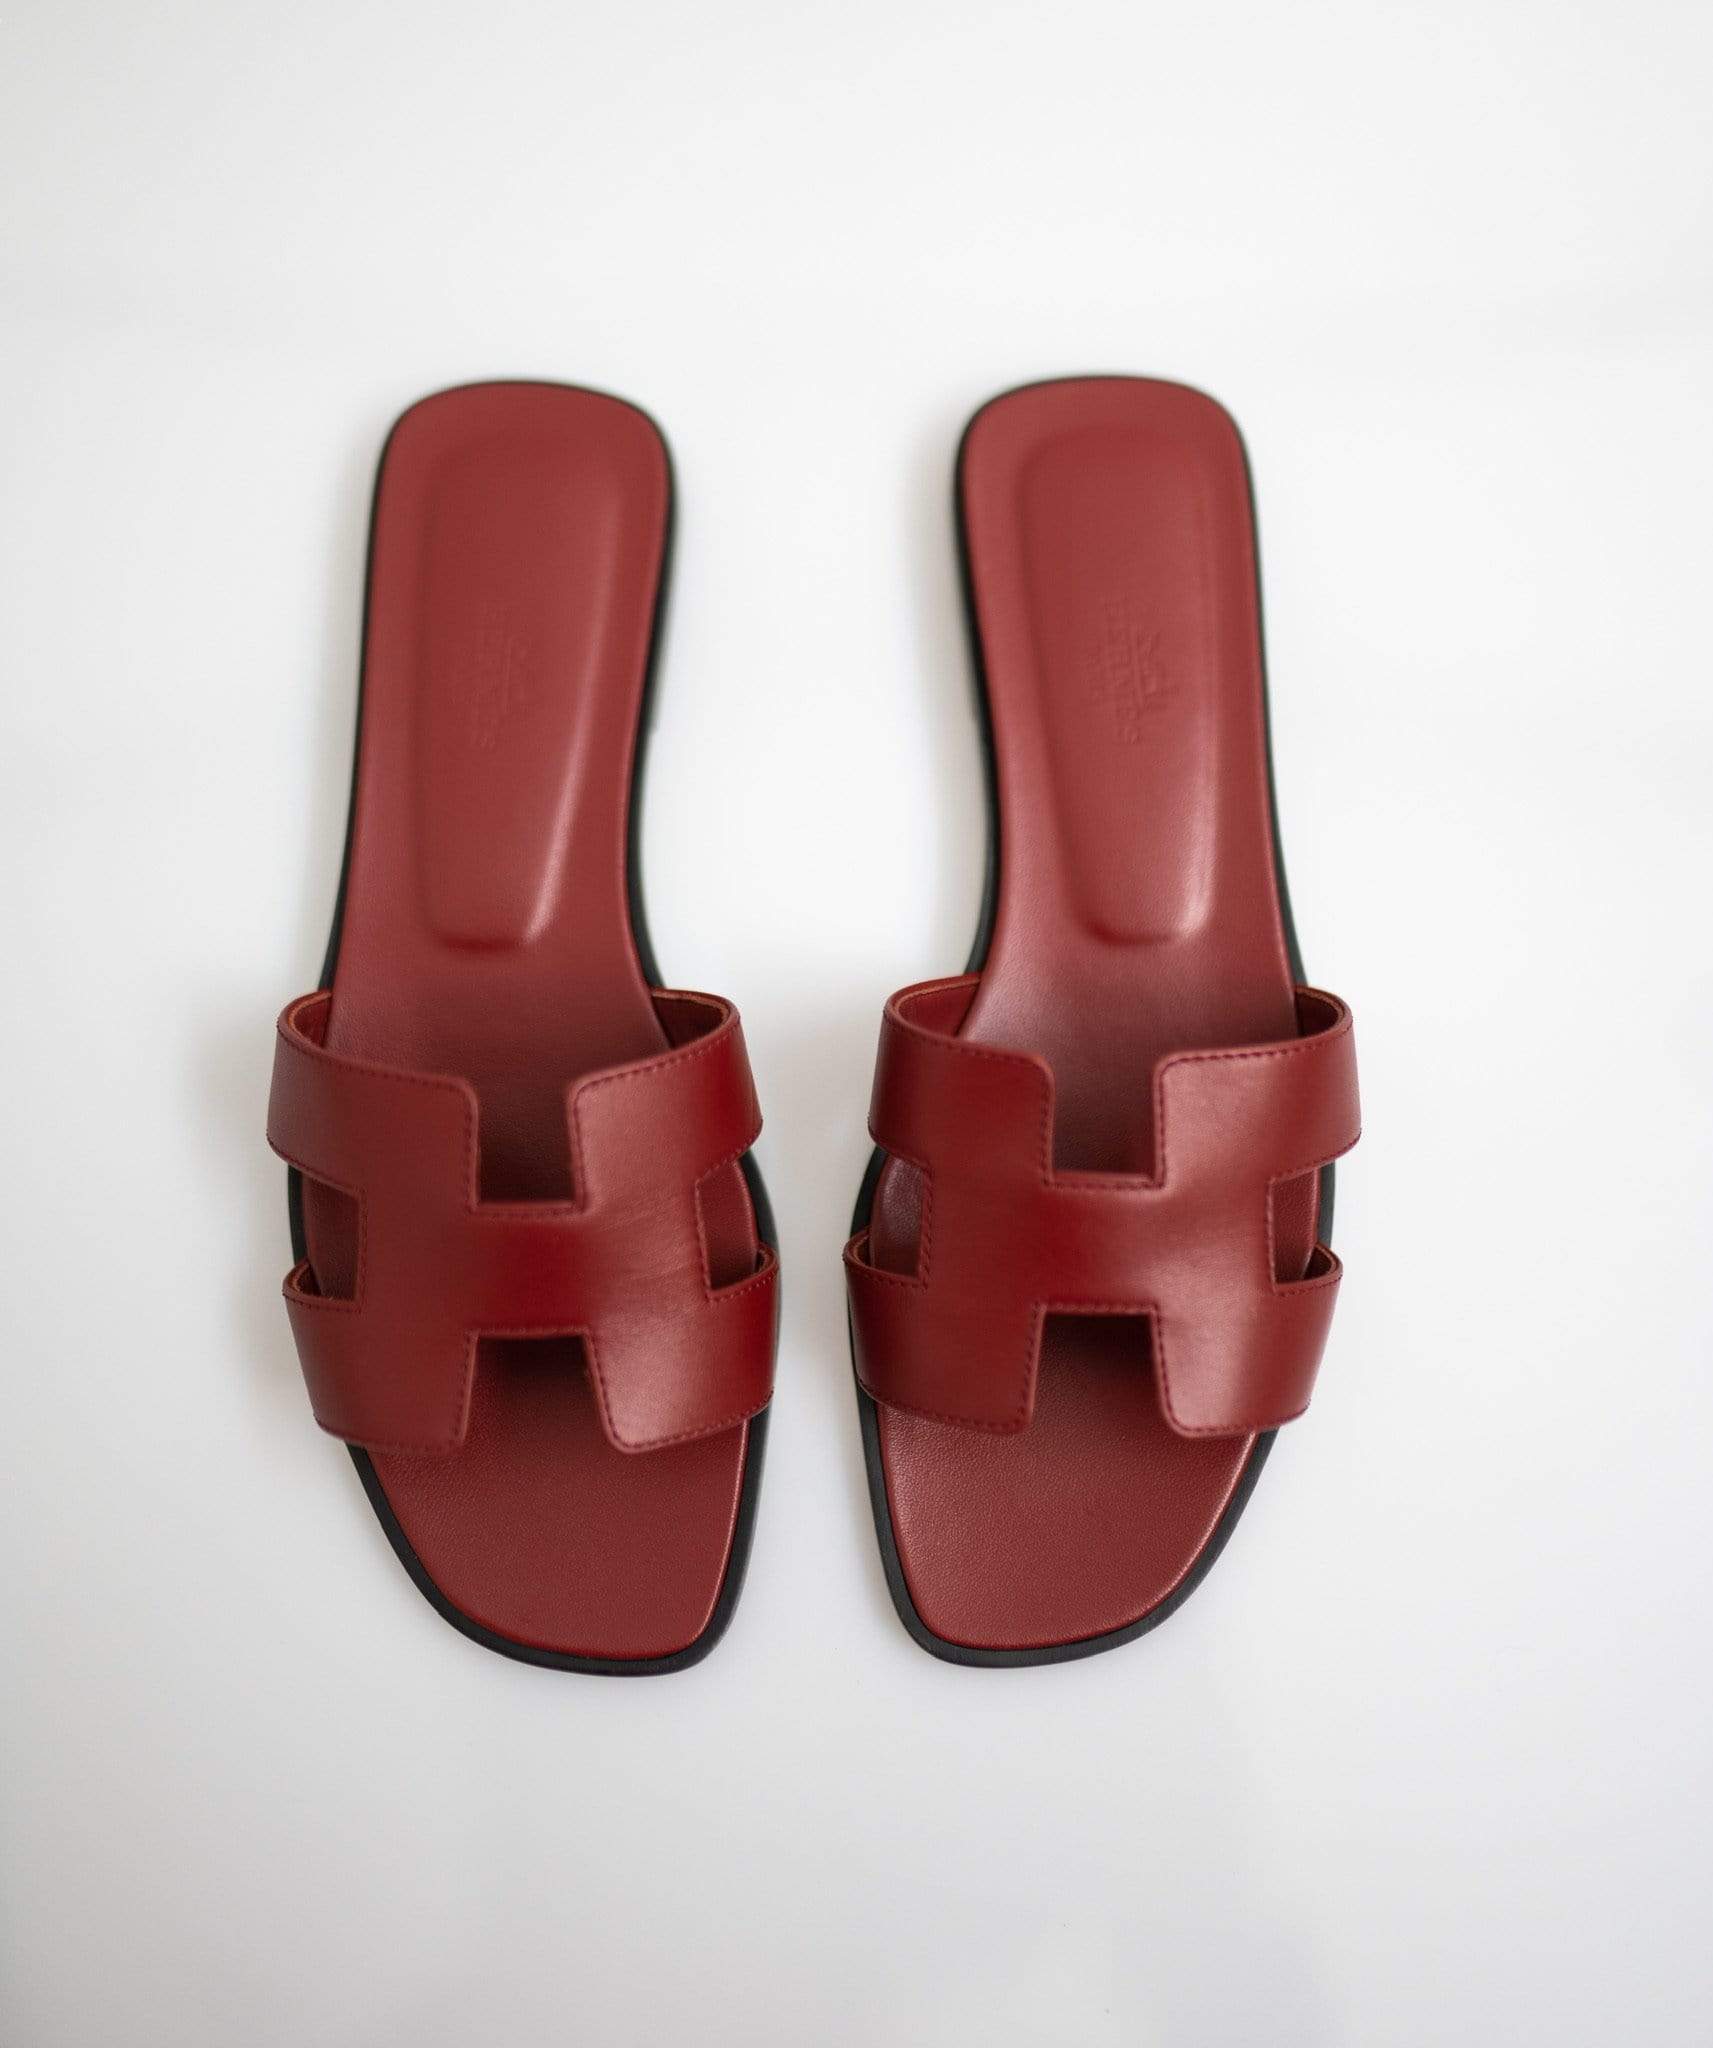 Hermes Oran Sandals Rouge H size 39.5 (9.5 US) in 2023